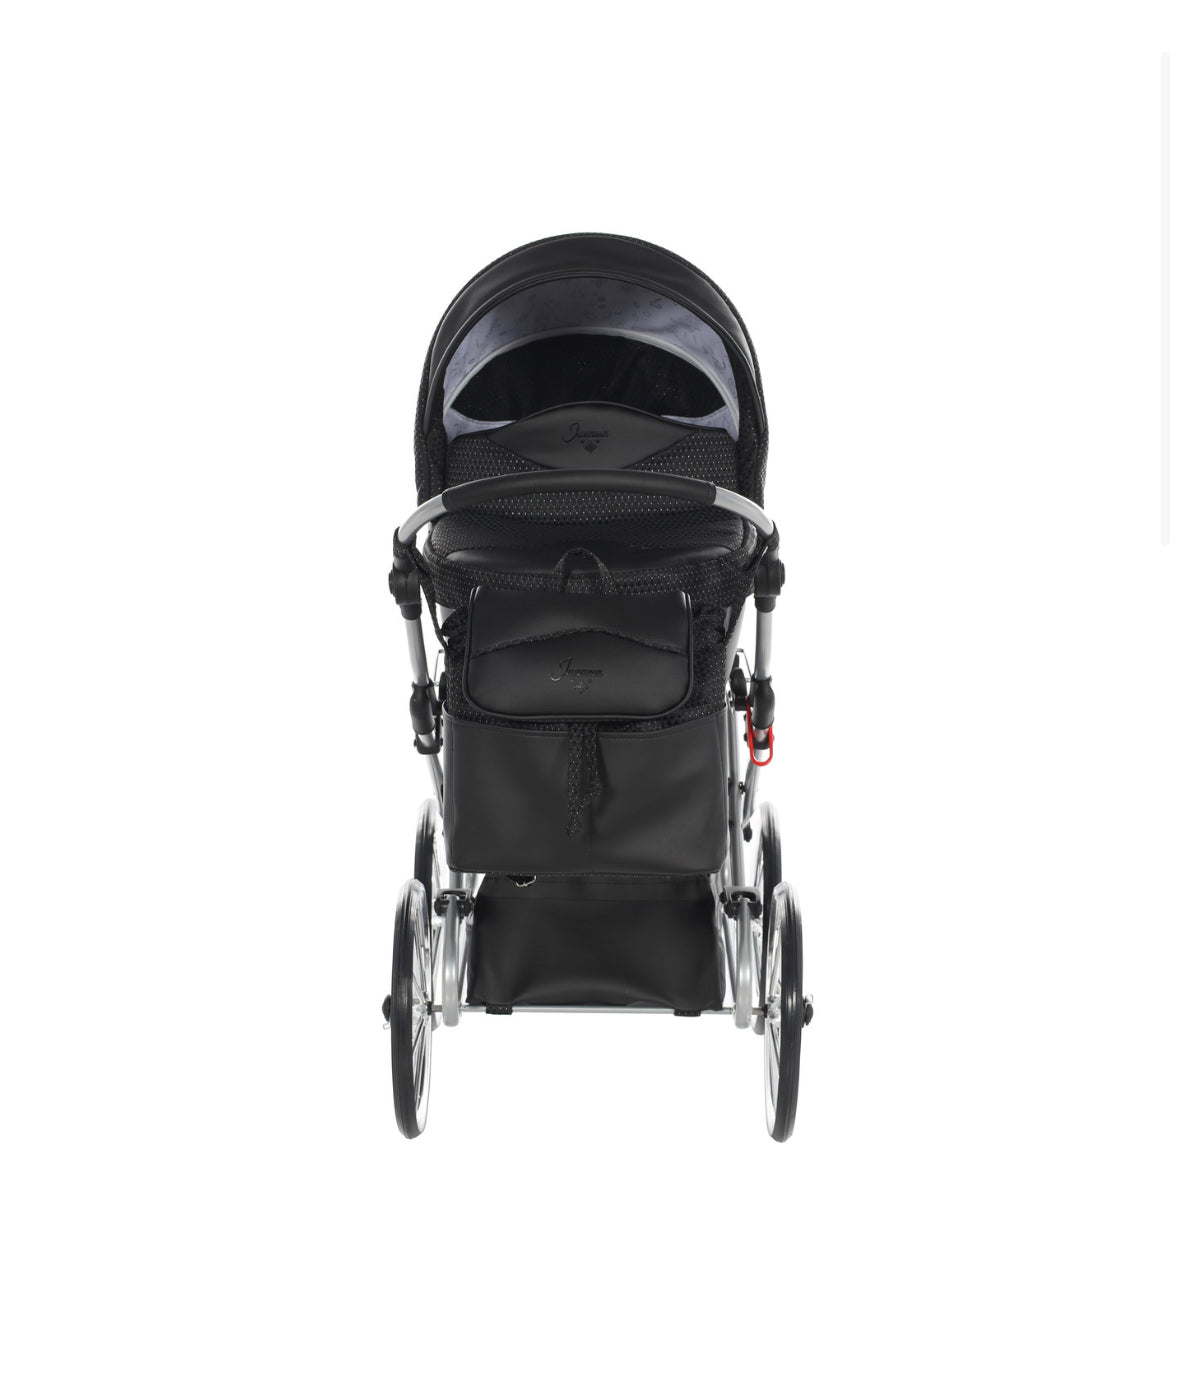 BLACK & SILVER DOLCE DOLL'S PRAM - Up to 21 days delivery!